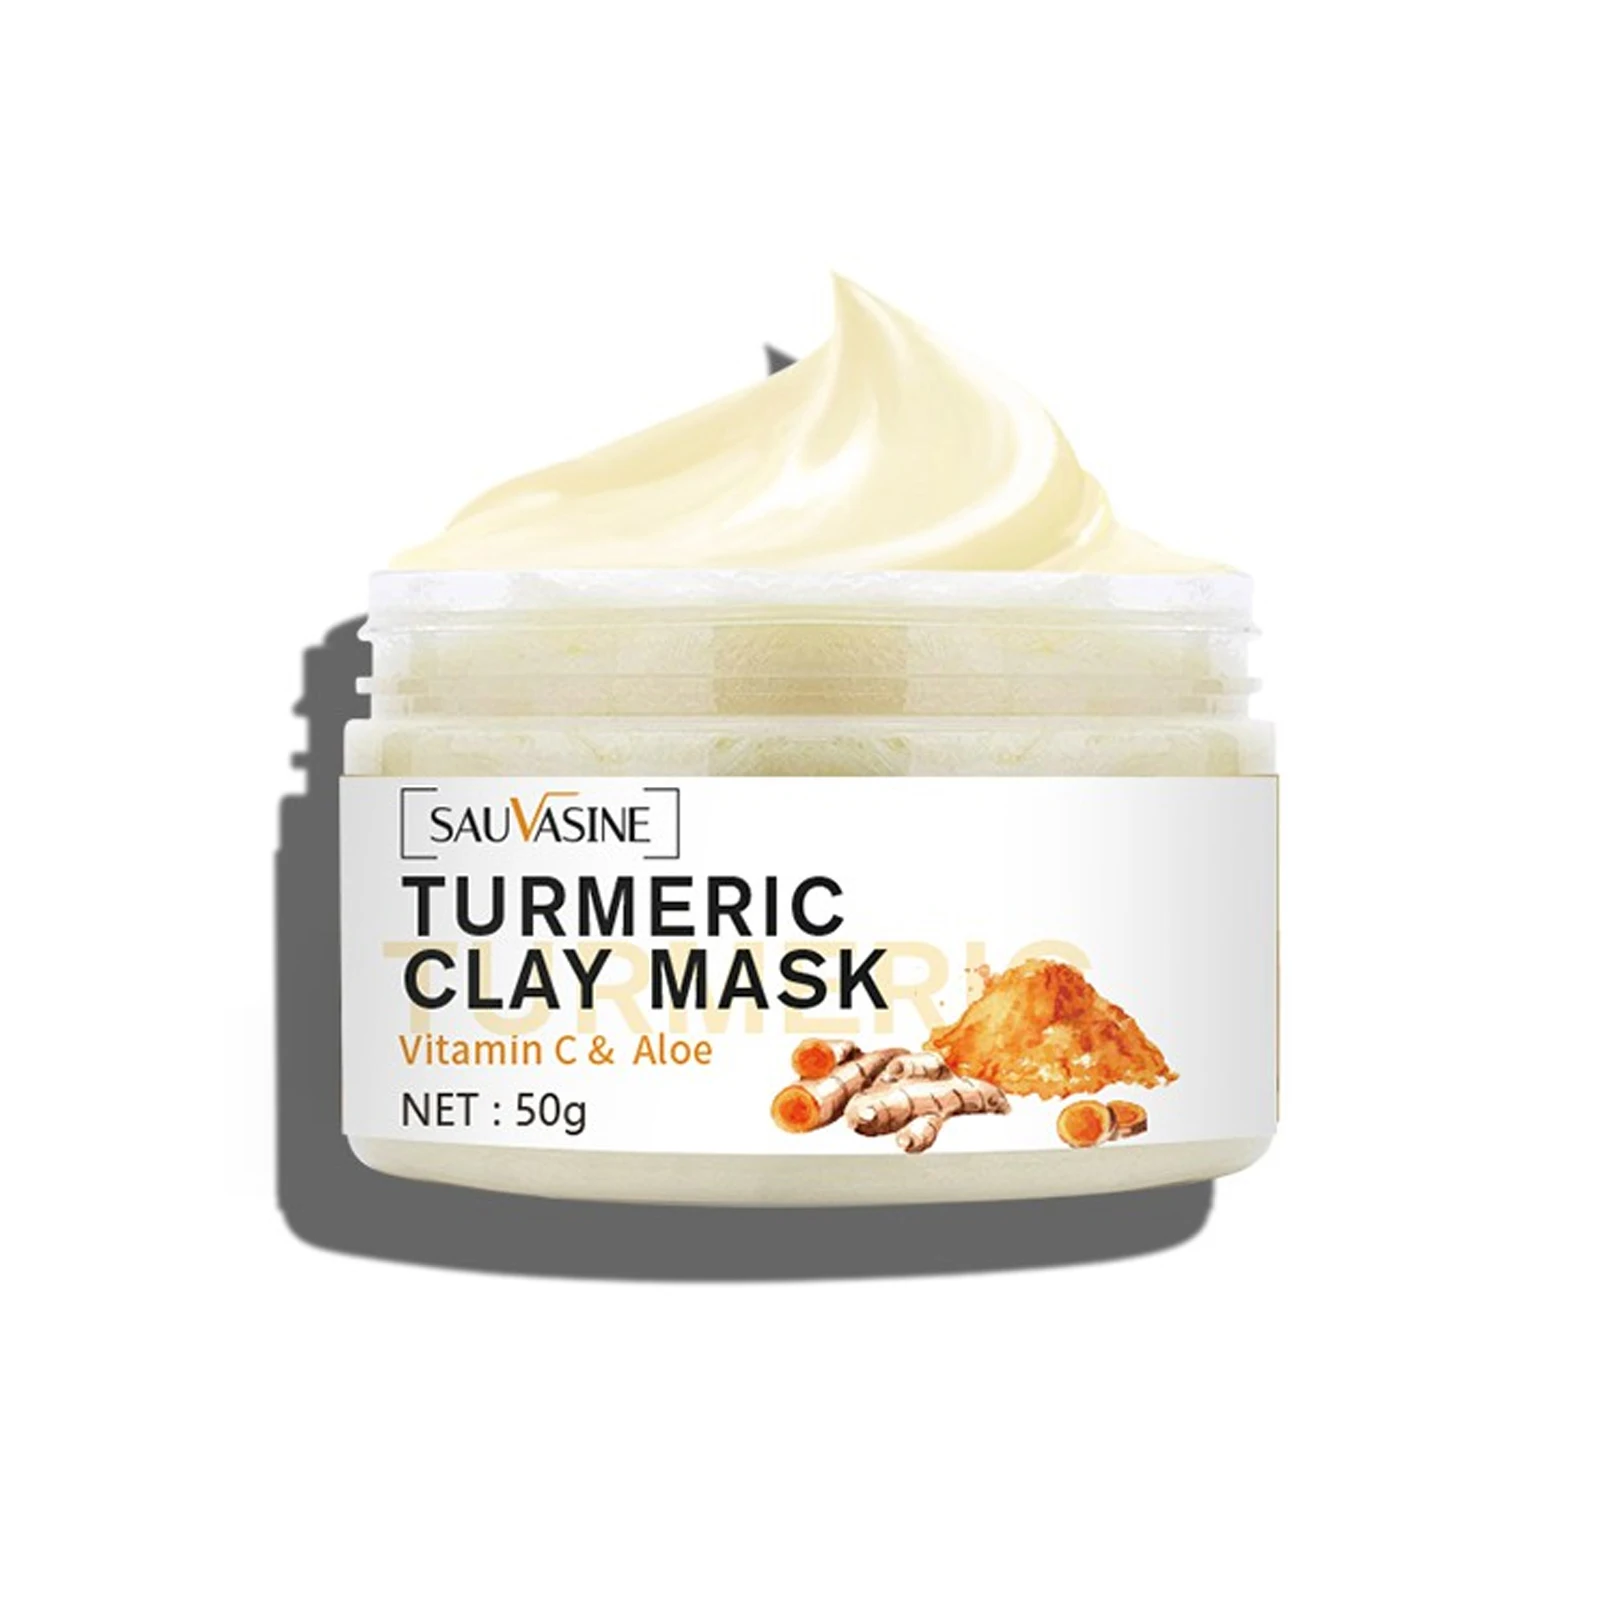 

Turmeric Mud Mask Whitening Brightening Hydrating Reduce Blackheads Acne Cleansing Pores Oil Control Clay Mask Skin Care 50g